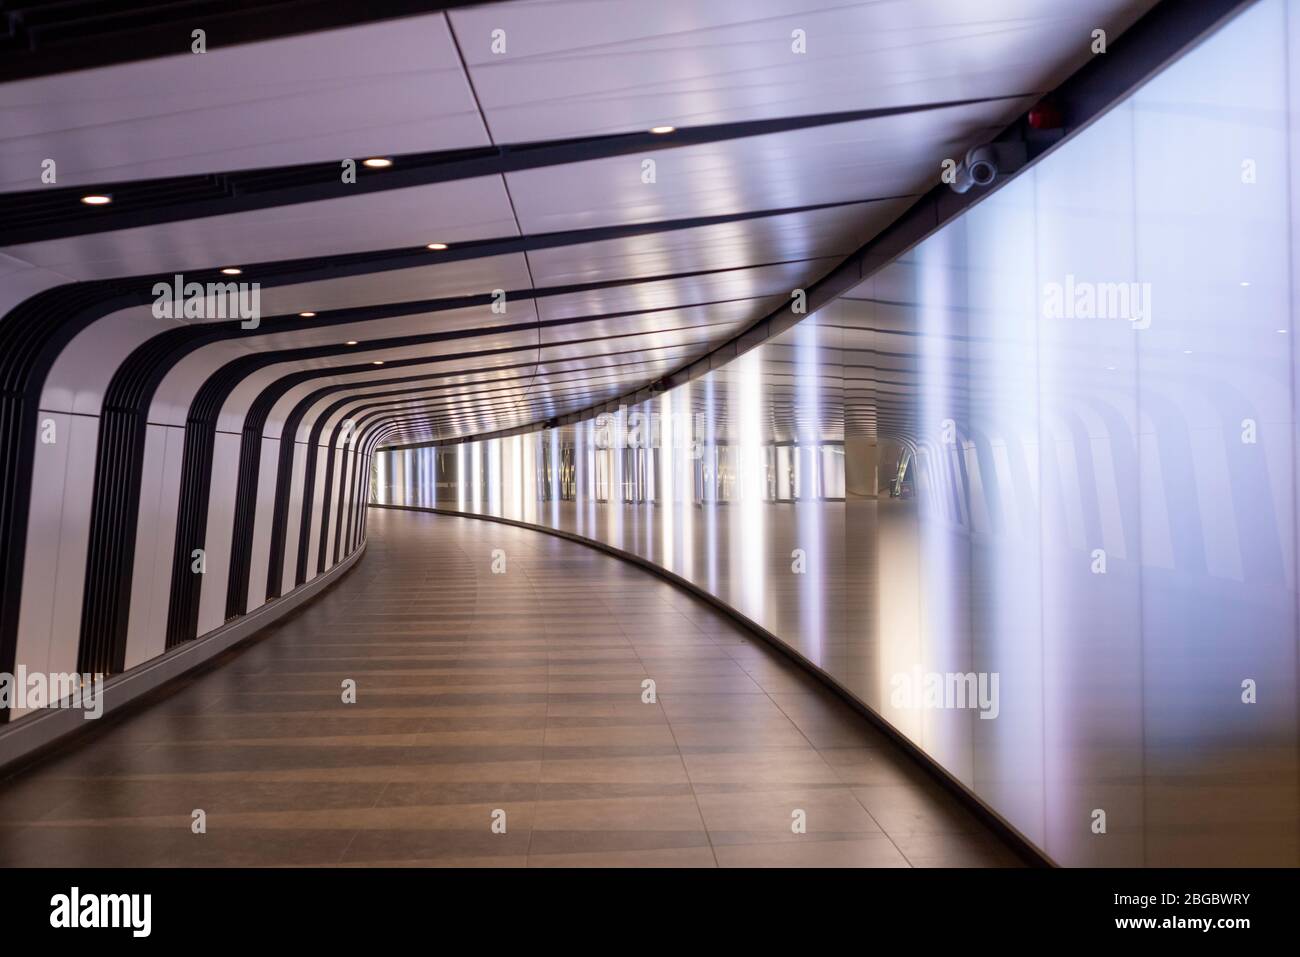 London underground interior and no people in the empty illuminated pedestrian light tunnel at St Pancras Underground Station in London, United Kingdom Stock Photo